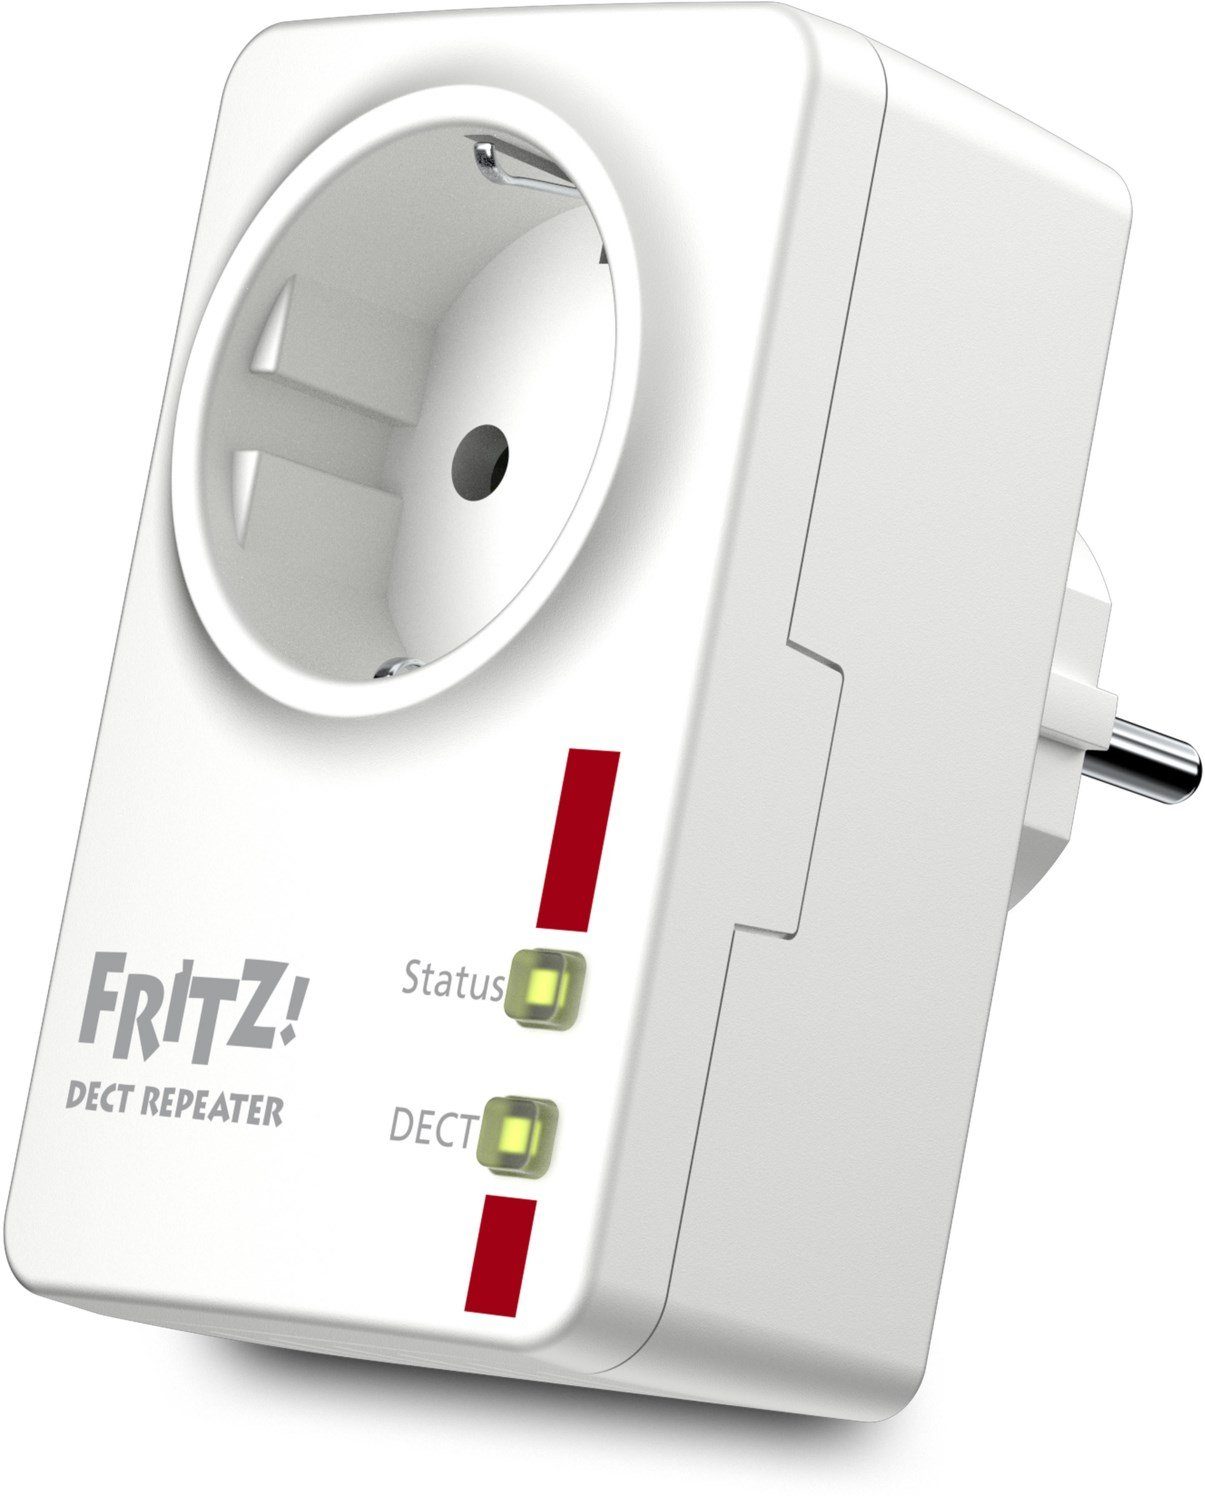 Fritz! AVM FRITZ!DECT WLAN-Repeater 100 WLAN-Router Repeater